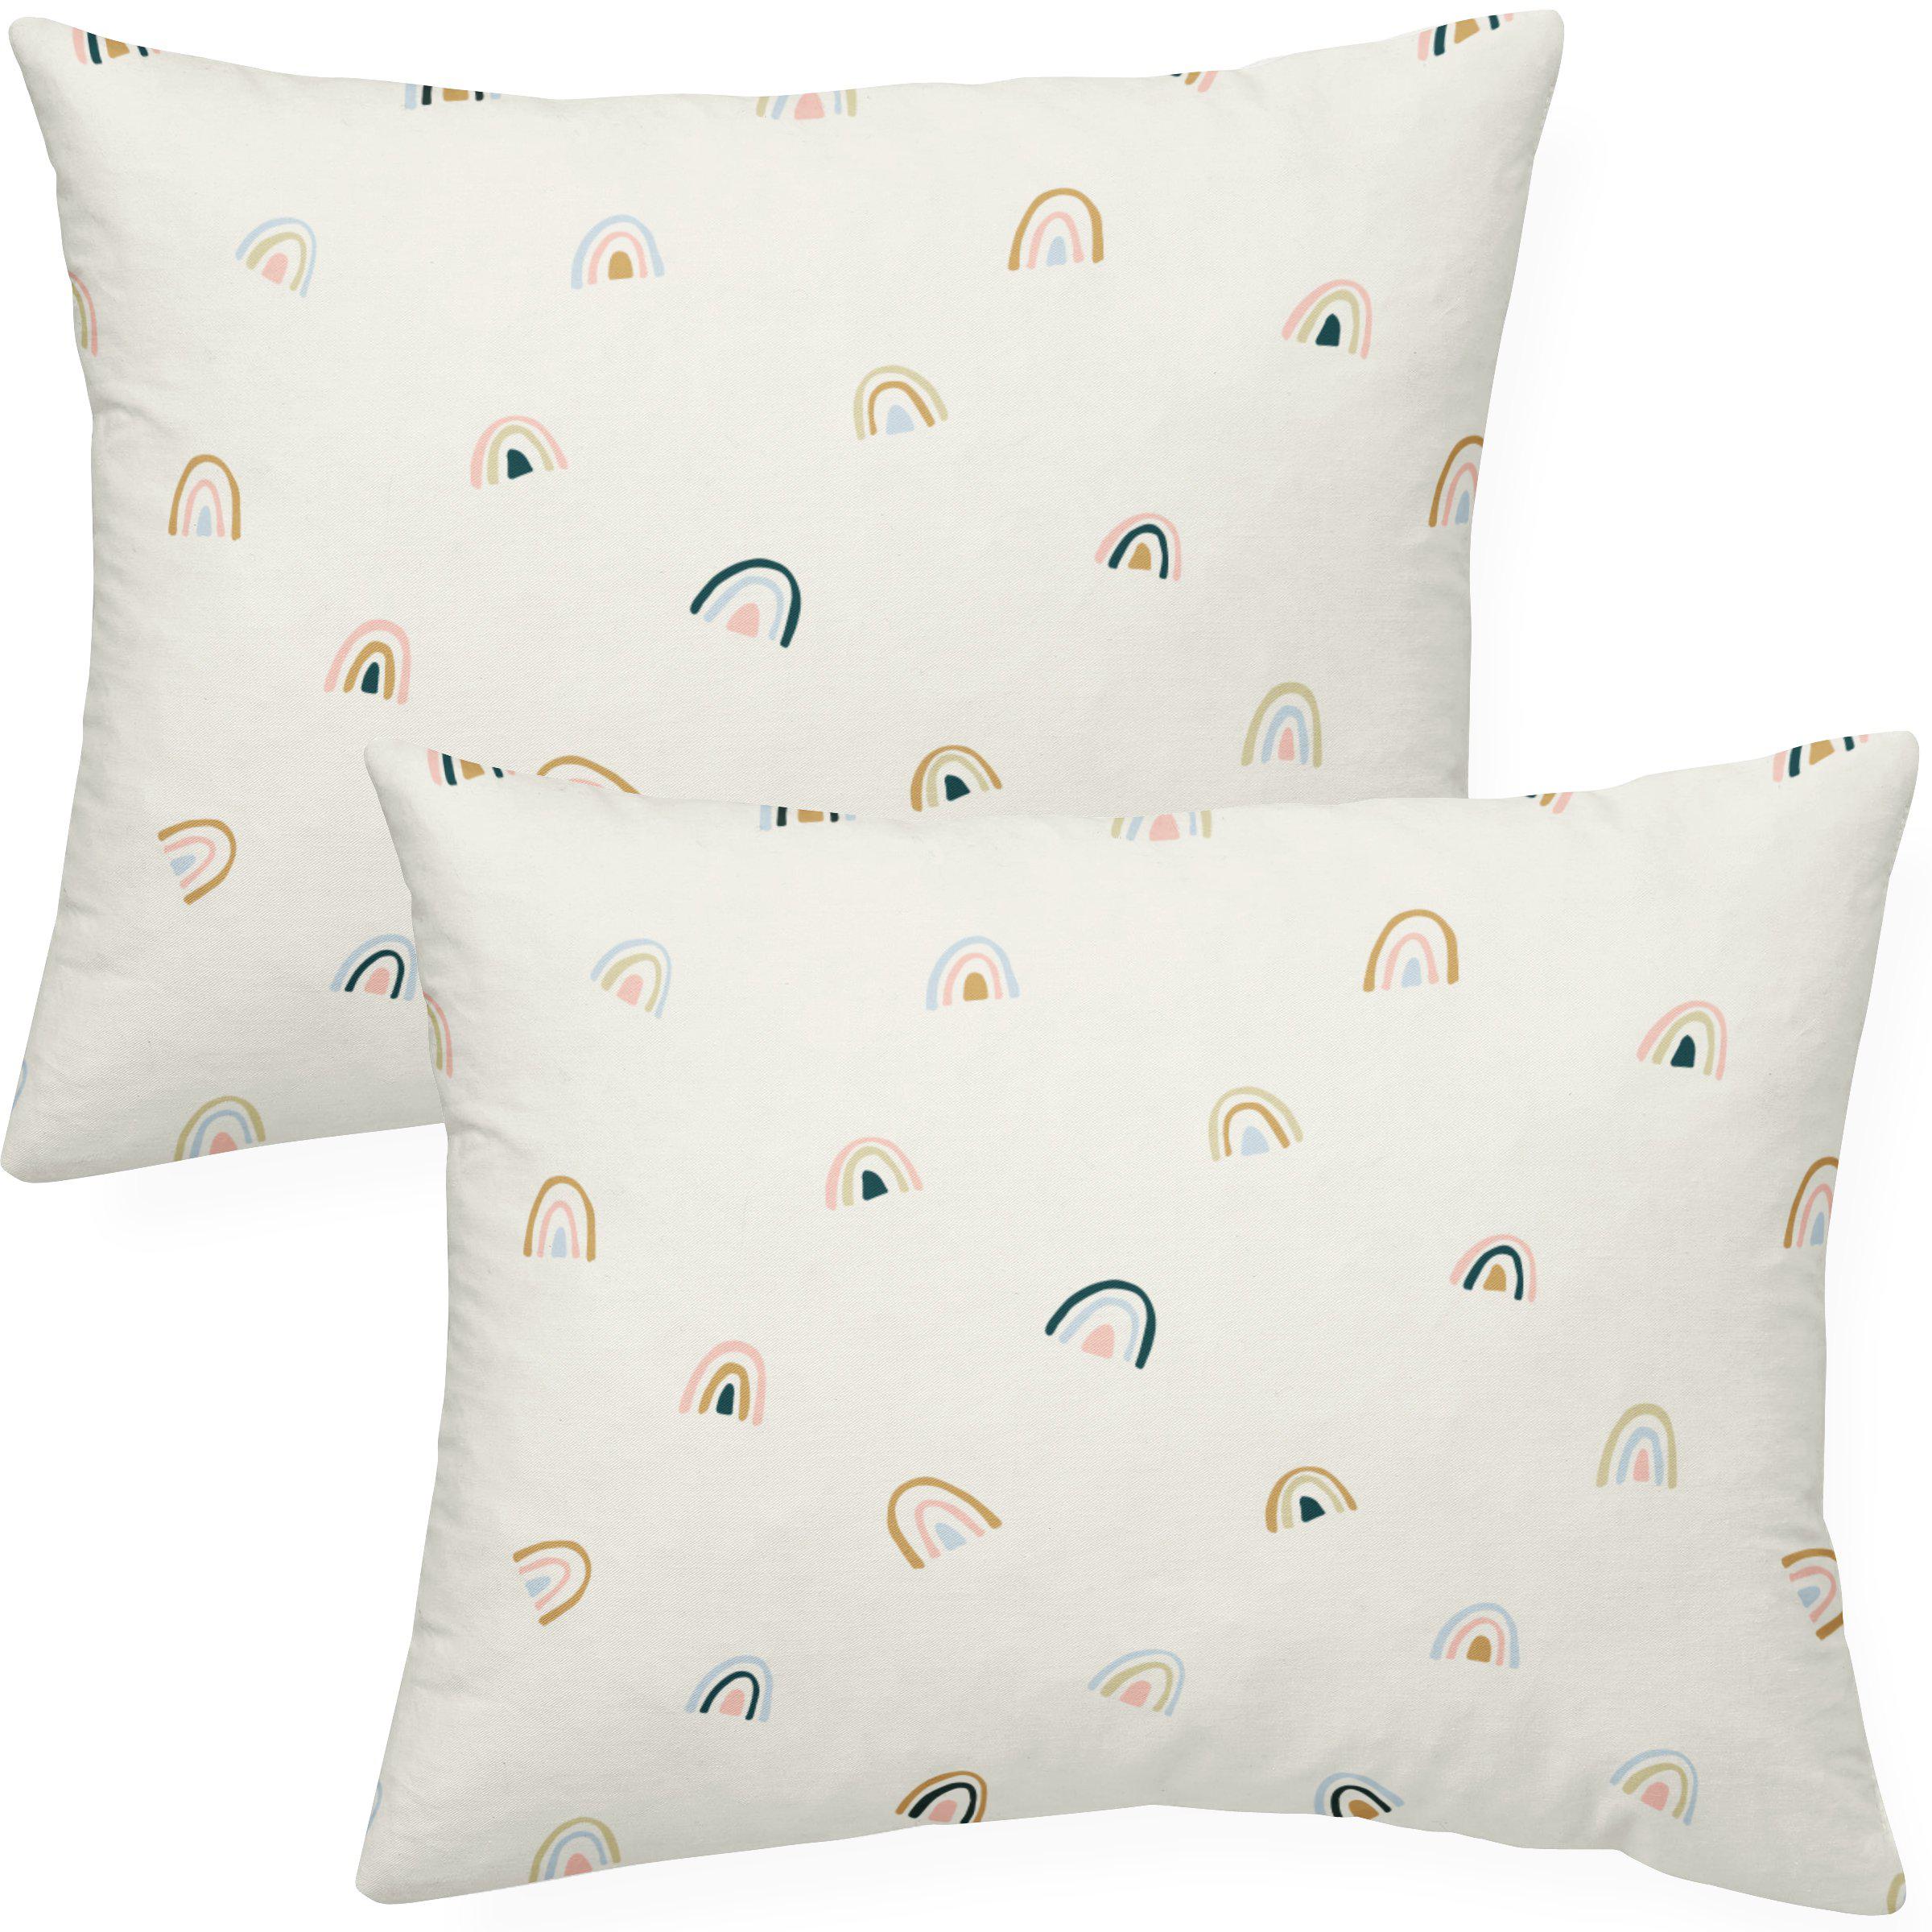 Two rectangular throw pillows with a pattern of pastel-colored, abstract rainbows on a white background. - Makemake Organics Organic Cotton Toddler Pillowcase - Rainbow